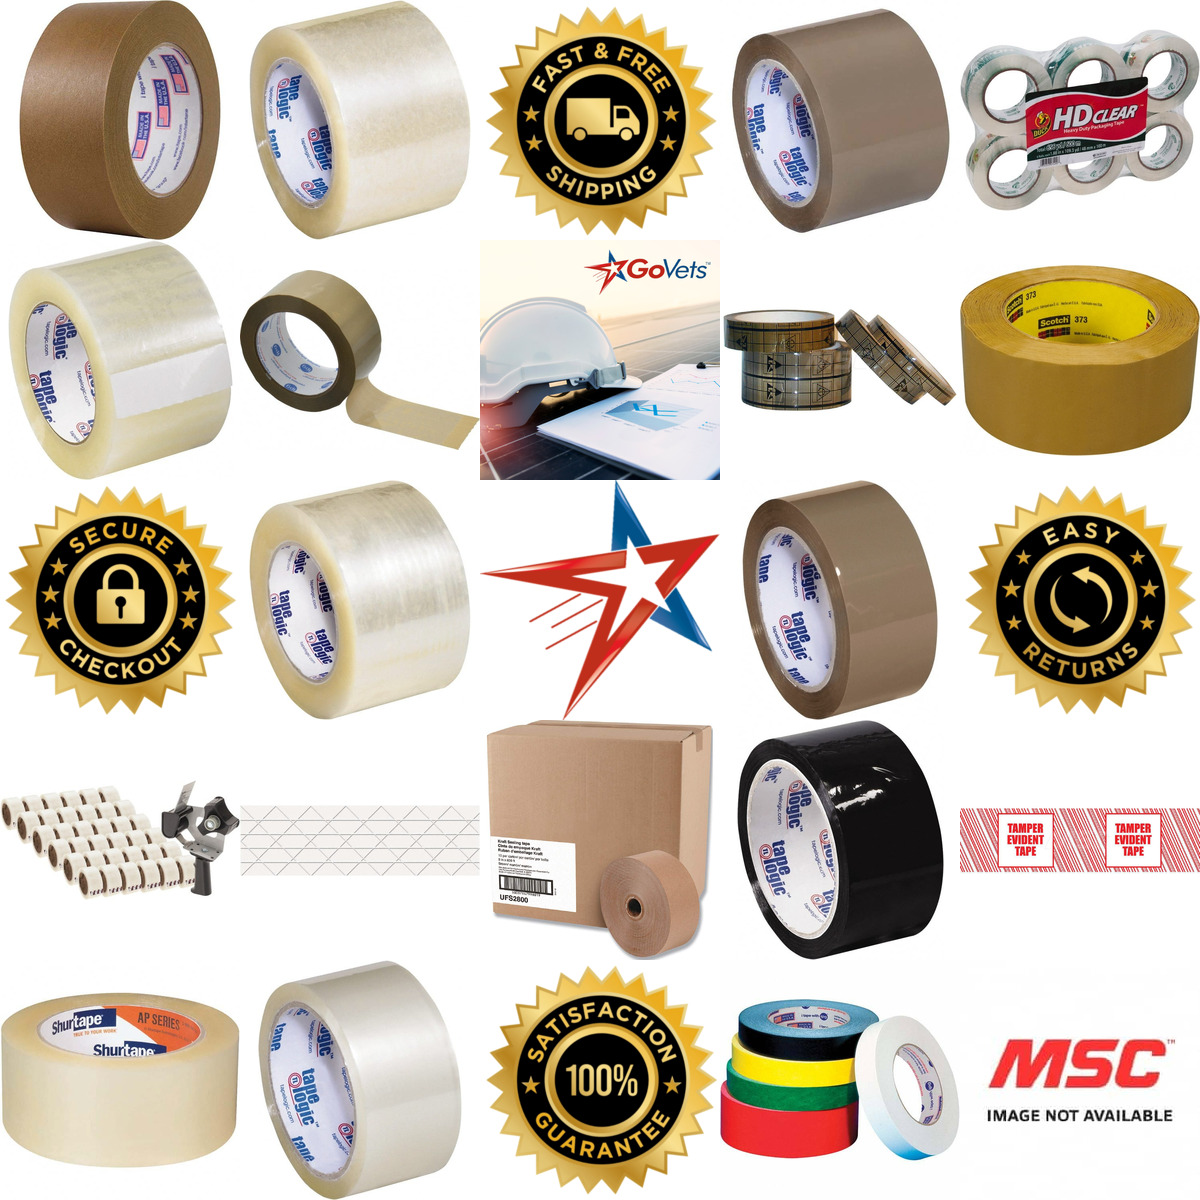 A selection of Packing Tape products on GoVets